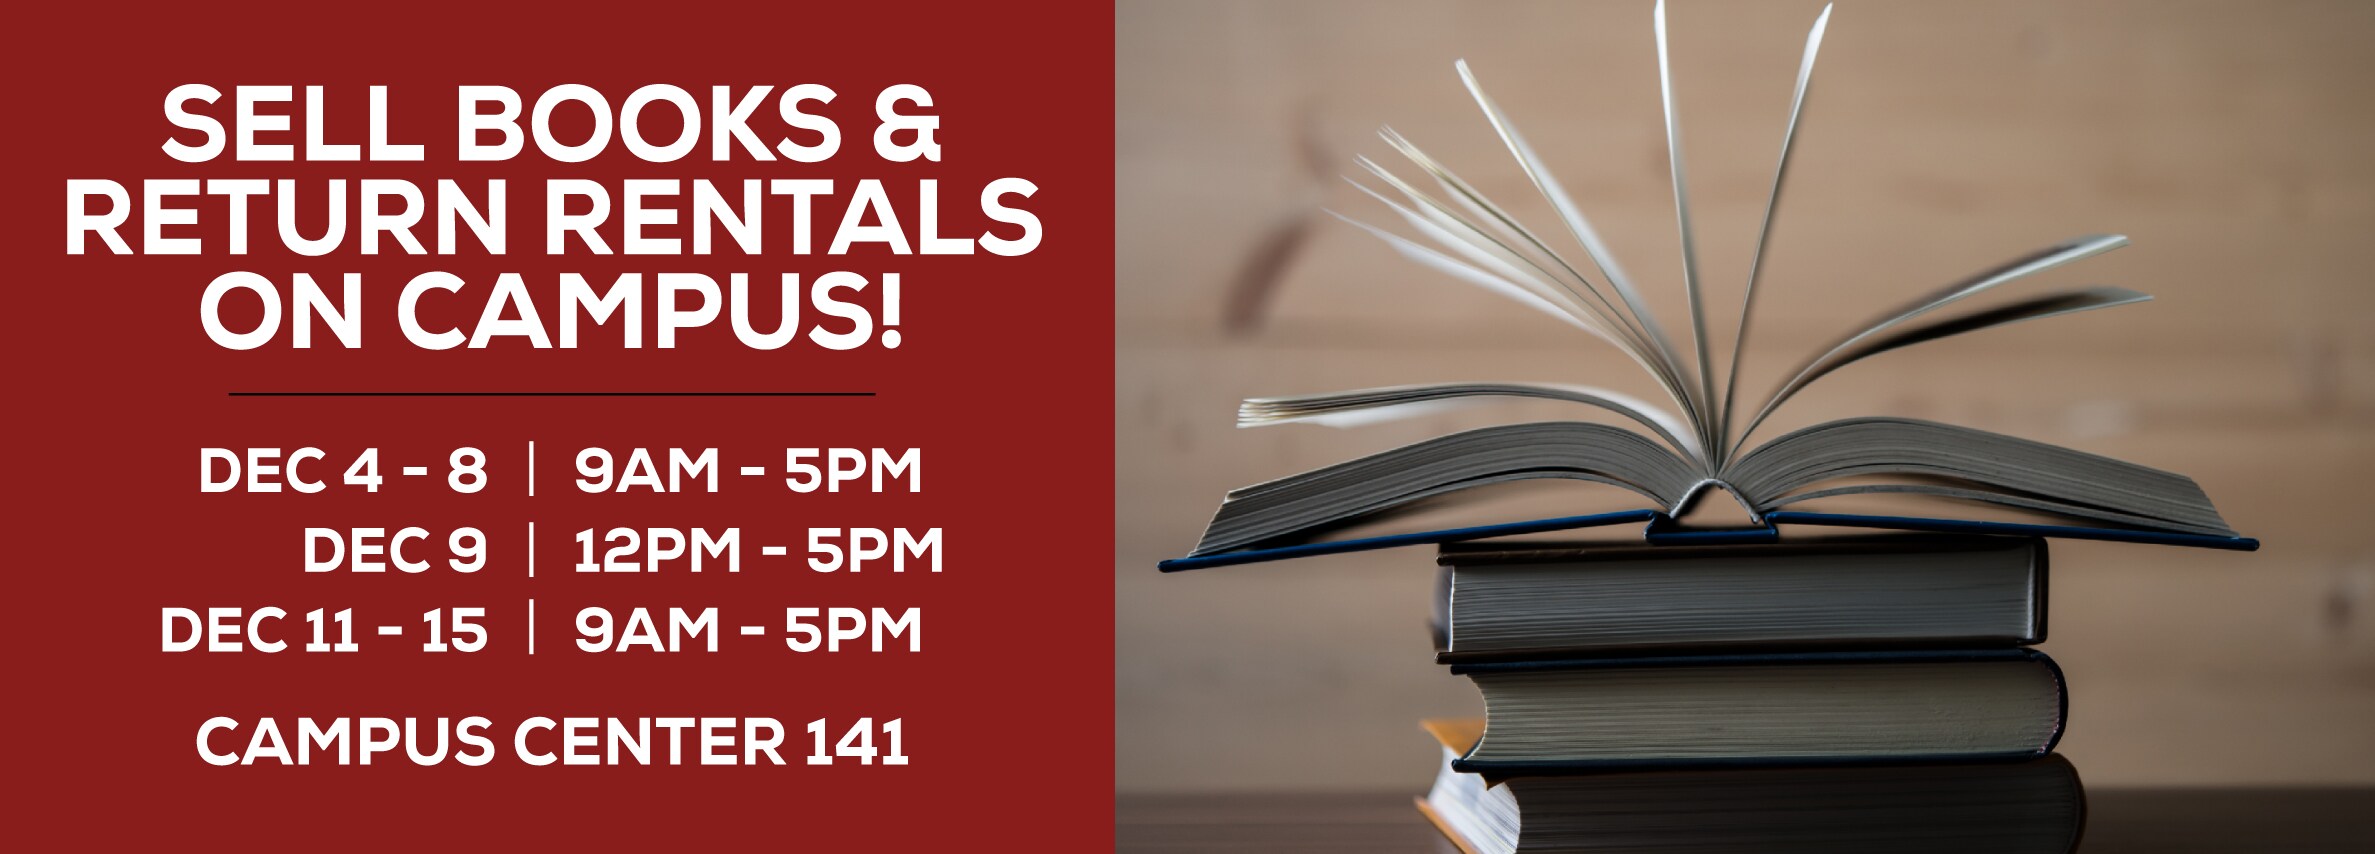 Sell Books & Return Rentals On Campus!  12/4-12/8/ & 12/11-12/15 9AM-5PM, Sat 12/9, 12P-5PM at Campus Center 141